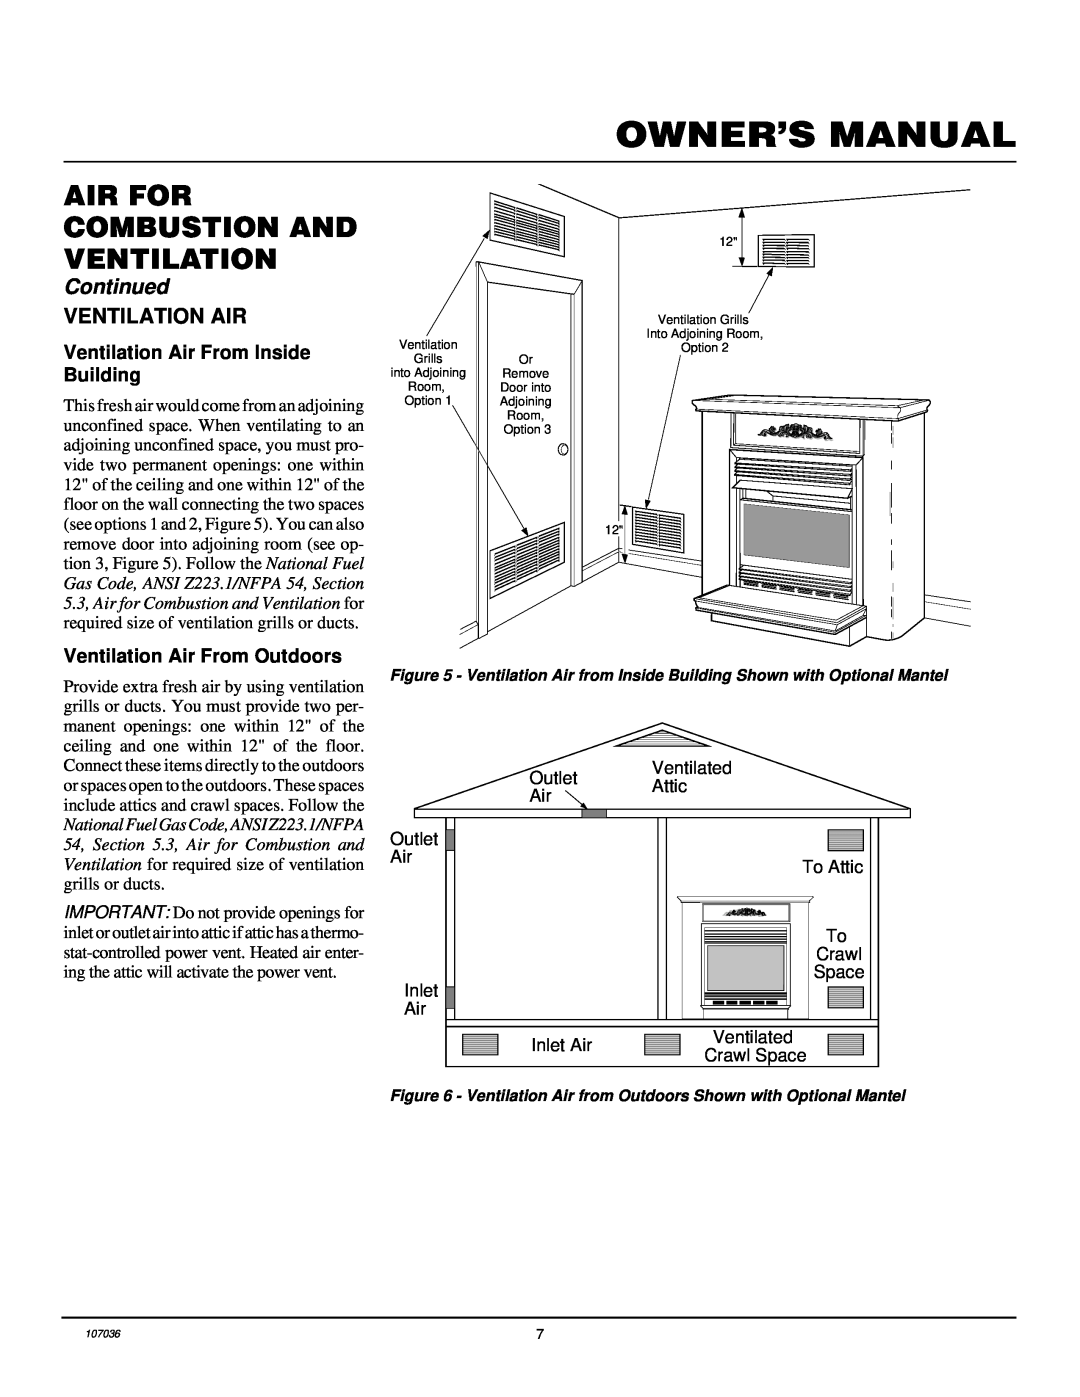 Desa CGCFTP 14 Ventilation Air From Inside Building, Ventilation Air From Outdoors, To Attic, Ventilated, Crawl Space 